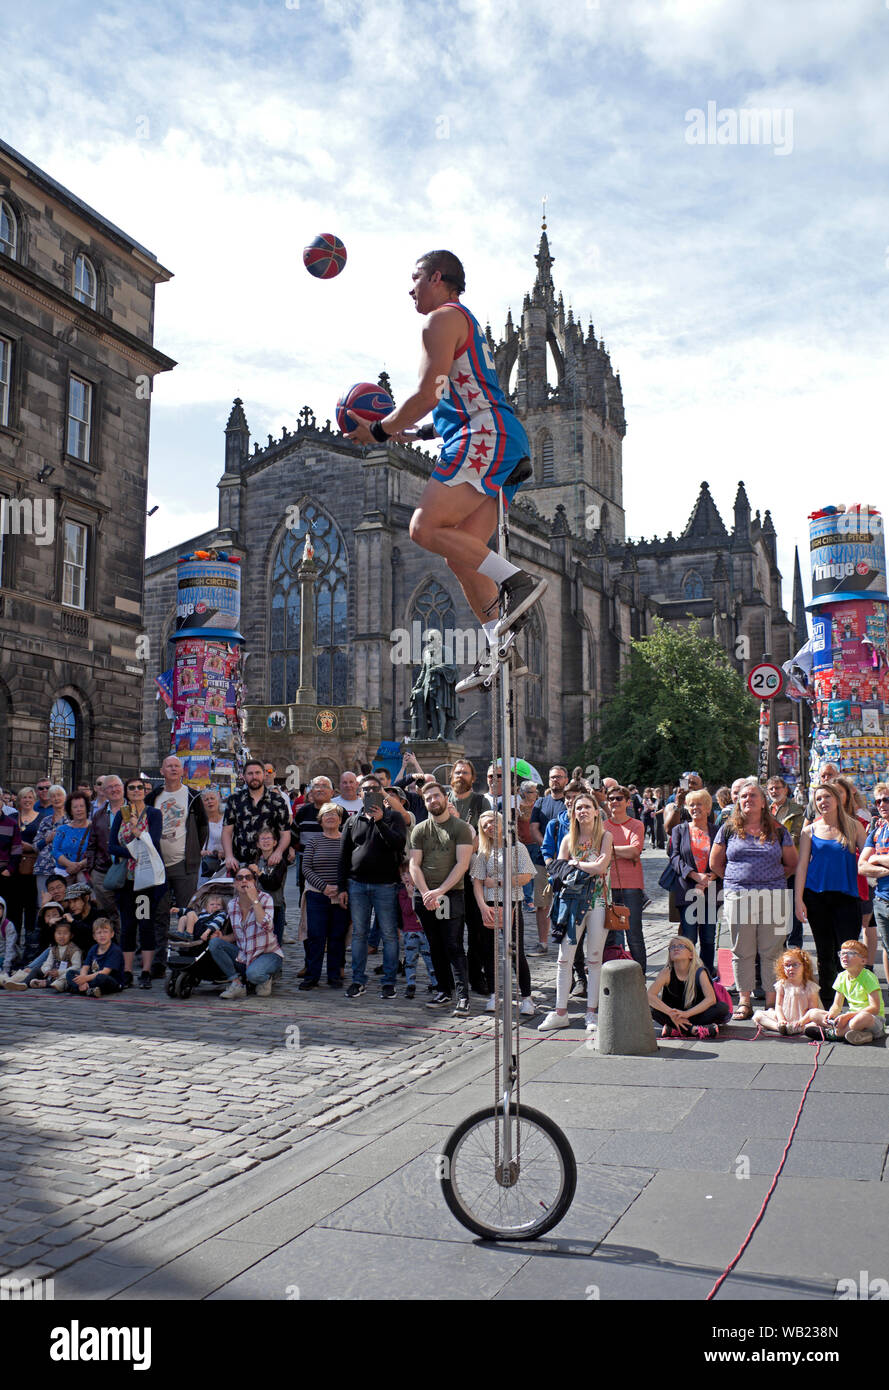 Royal Mile, Edinburgh, Scotland, UK. 23rd August 2019. Basketball Jones juggles balls and a fire torch on the High Street, with St Giles Cathedral in the background. Stock Photo